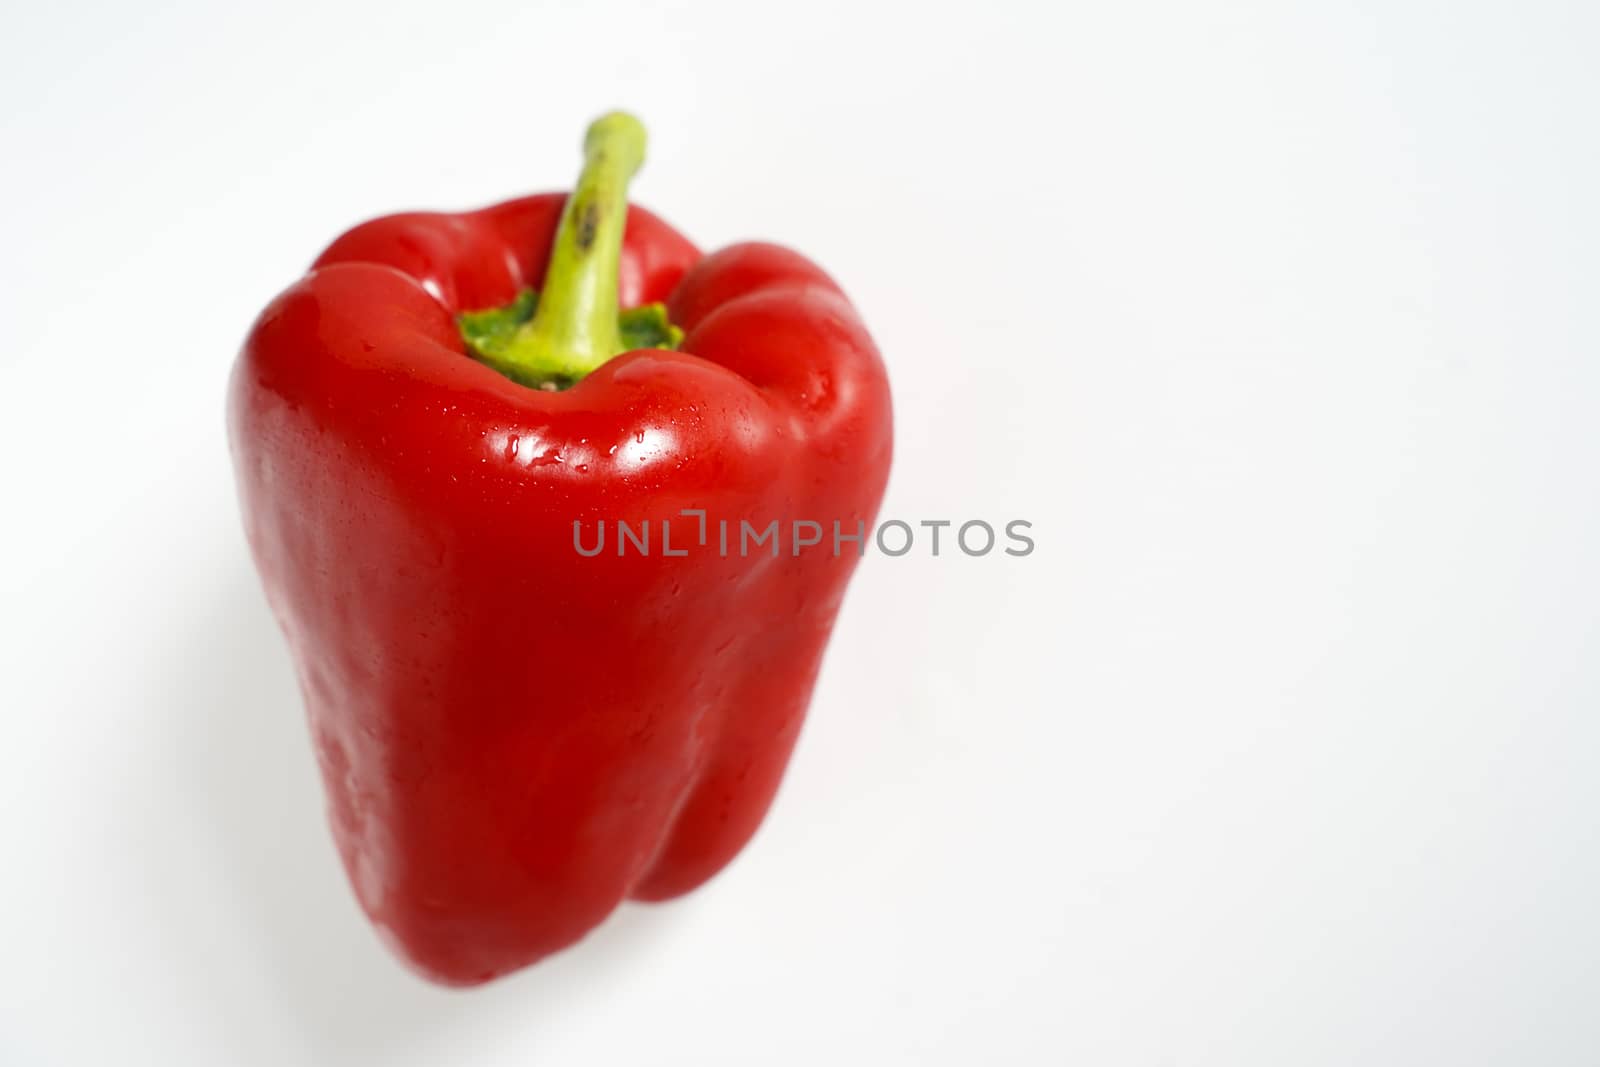 A red pepper against a plain white background